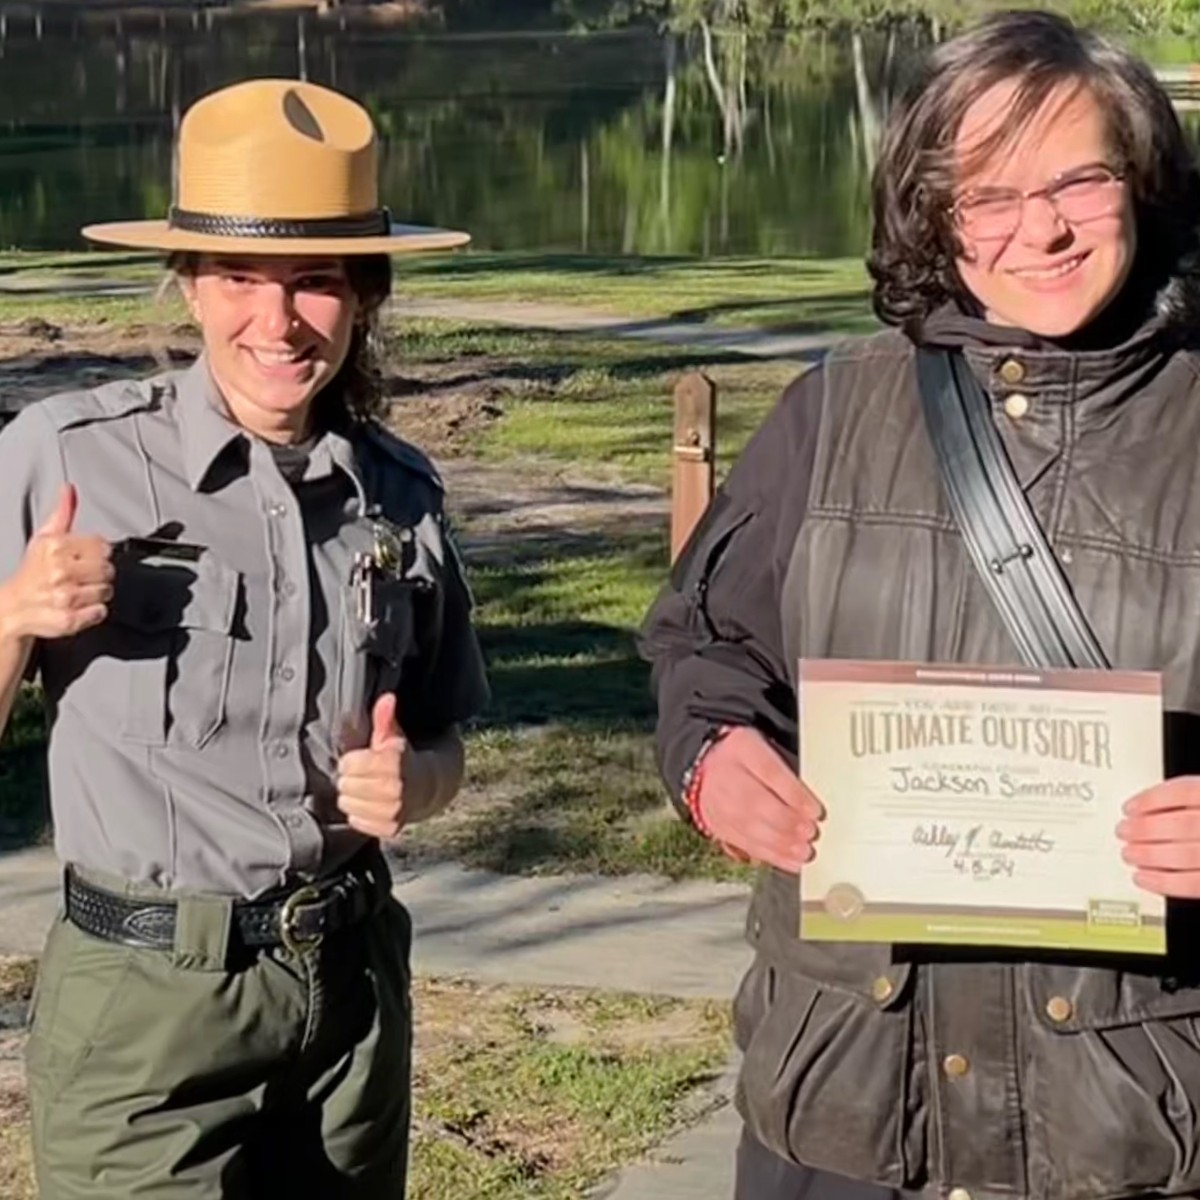 Congrats to Jackson from Lexington, SC for becoming an Ultimate Outsider at Barnwell State Park! His journey started with a park guide from his Boy Scout Troop leader and turned into a family adventure with his parents and grandpa. #ultimateoutsider #barnwellstatepark